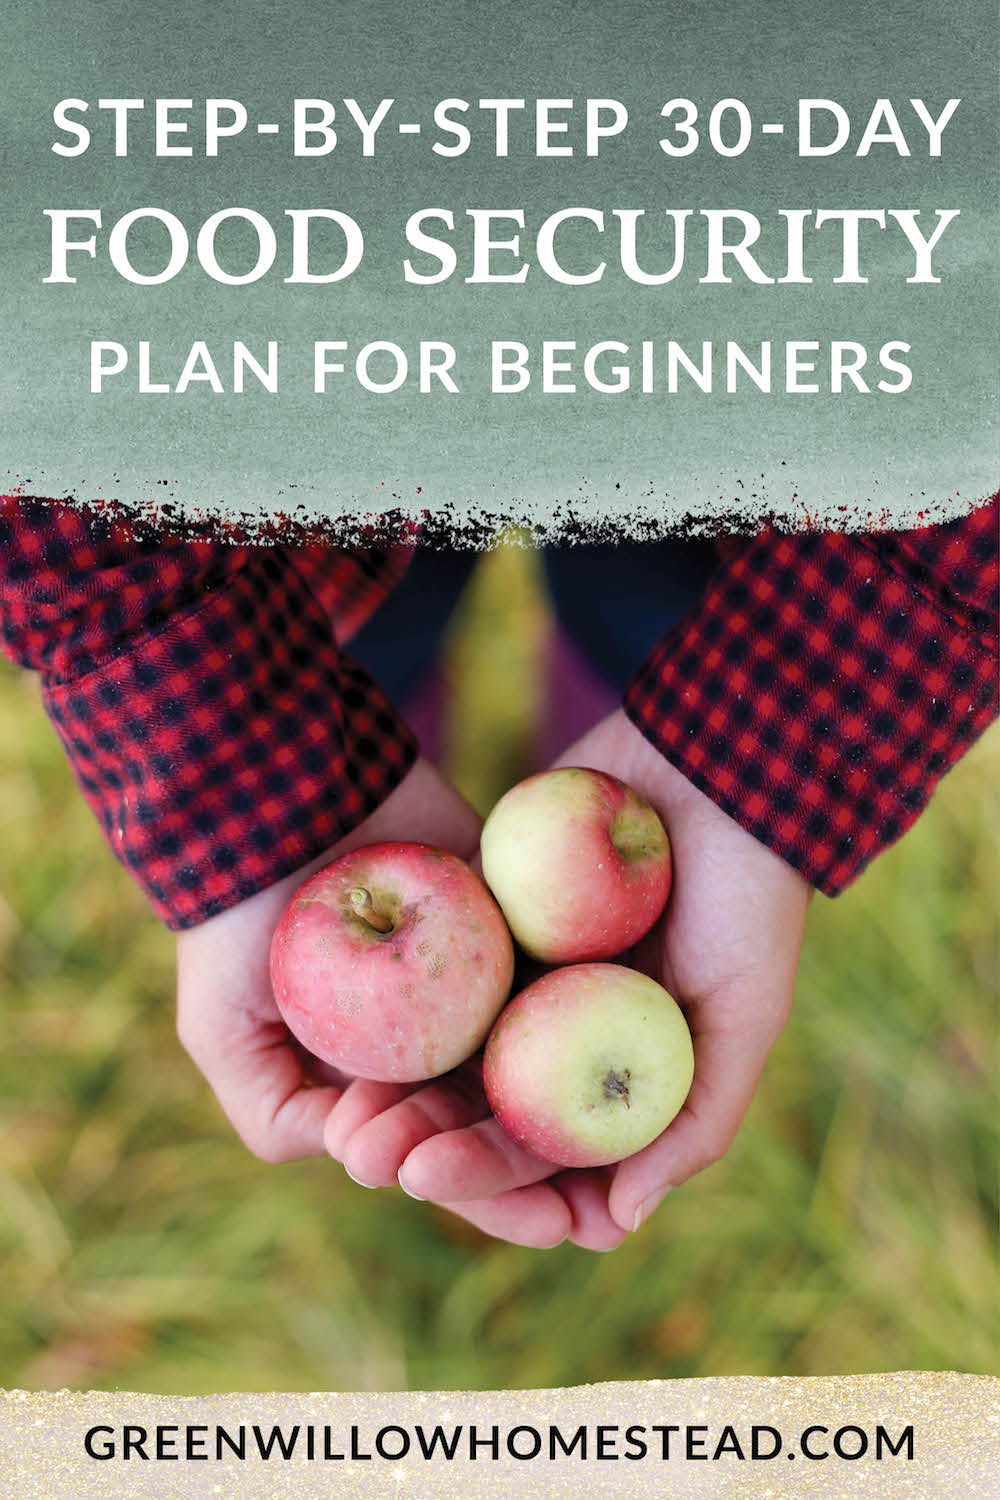 Step by step food security plan for beginners